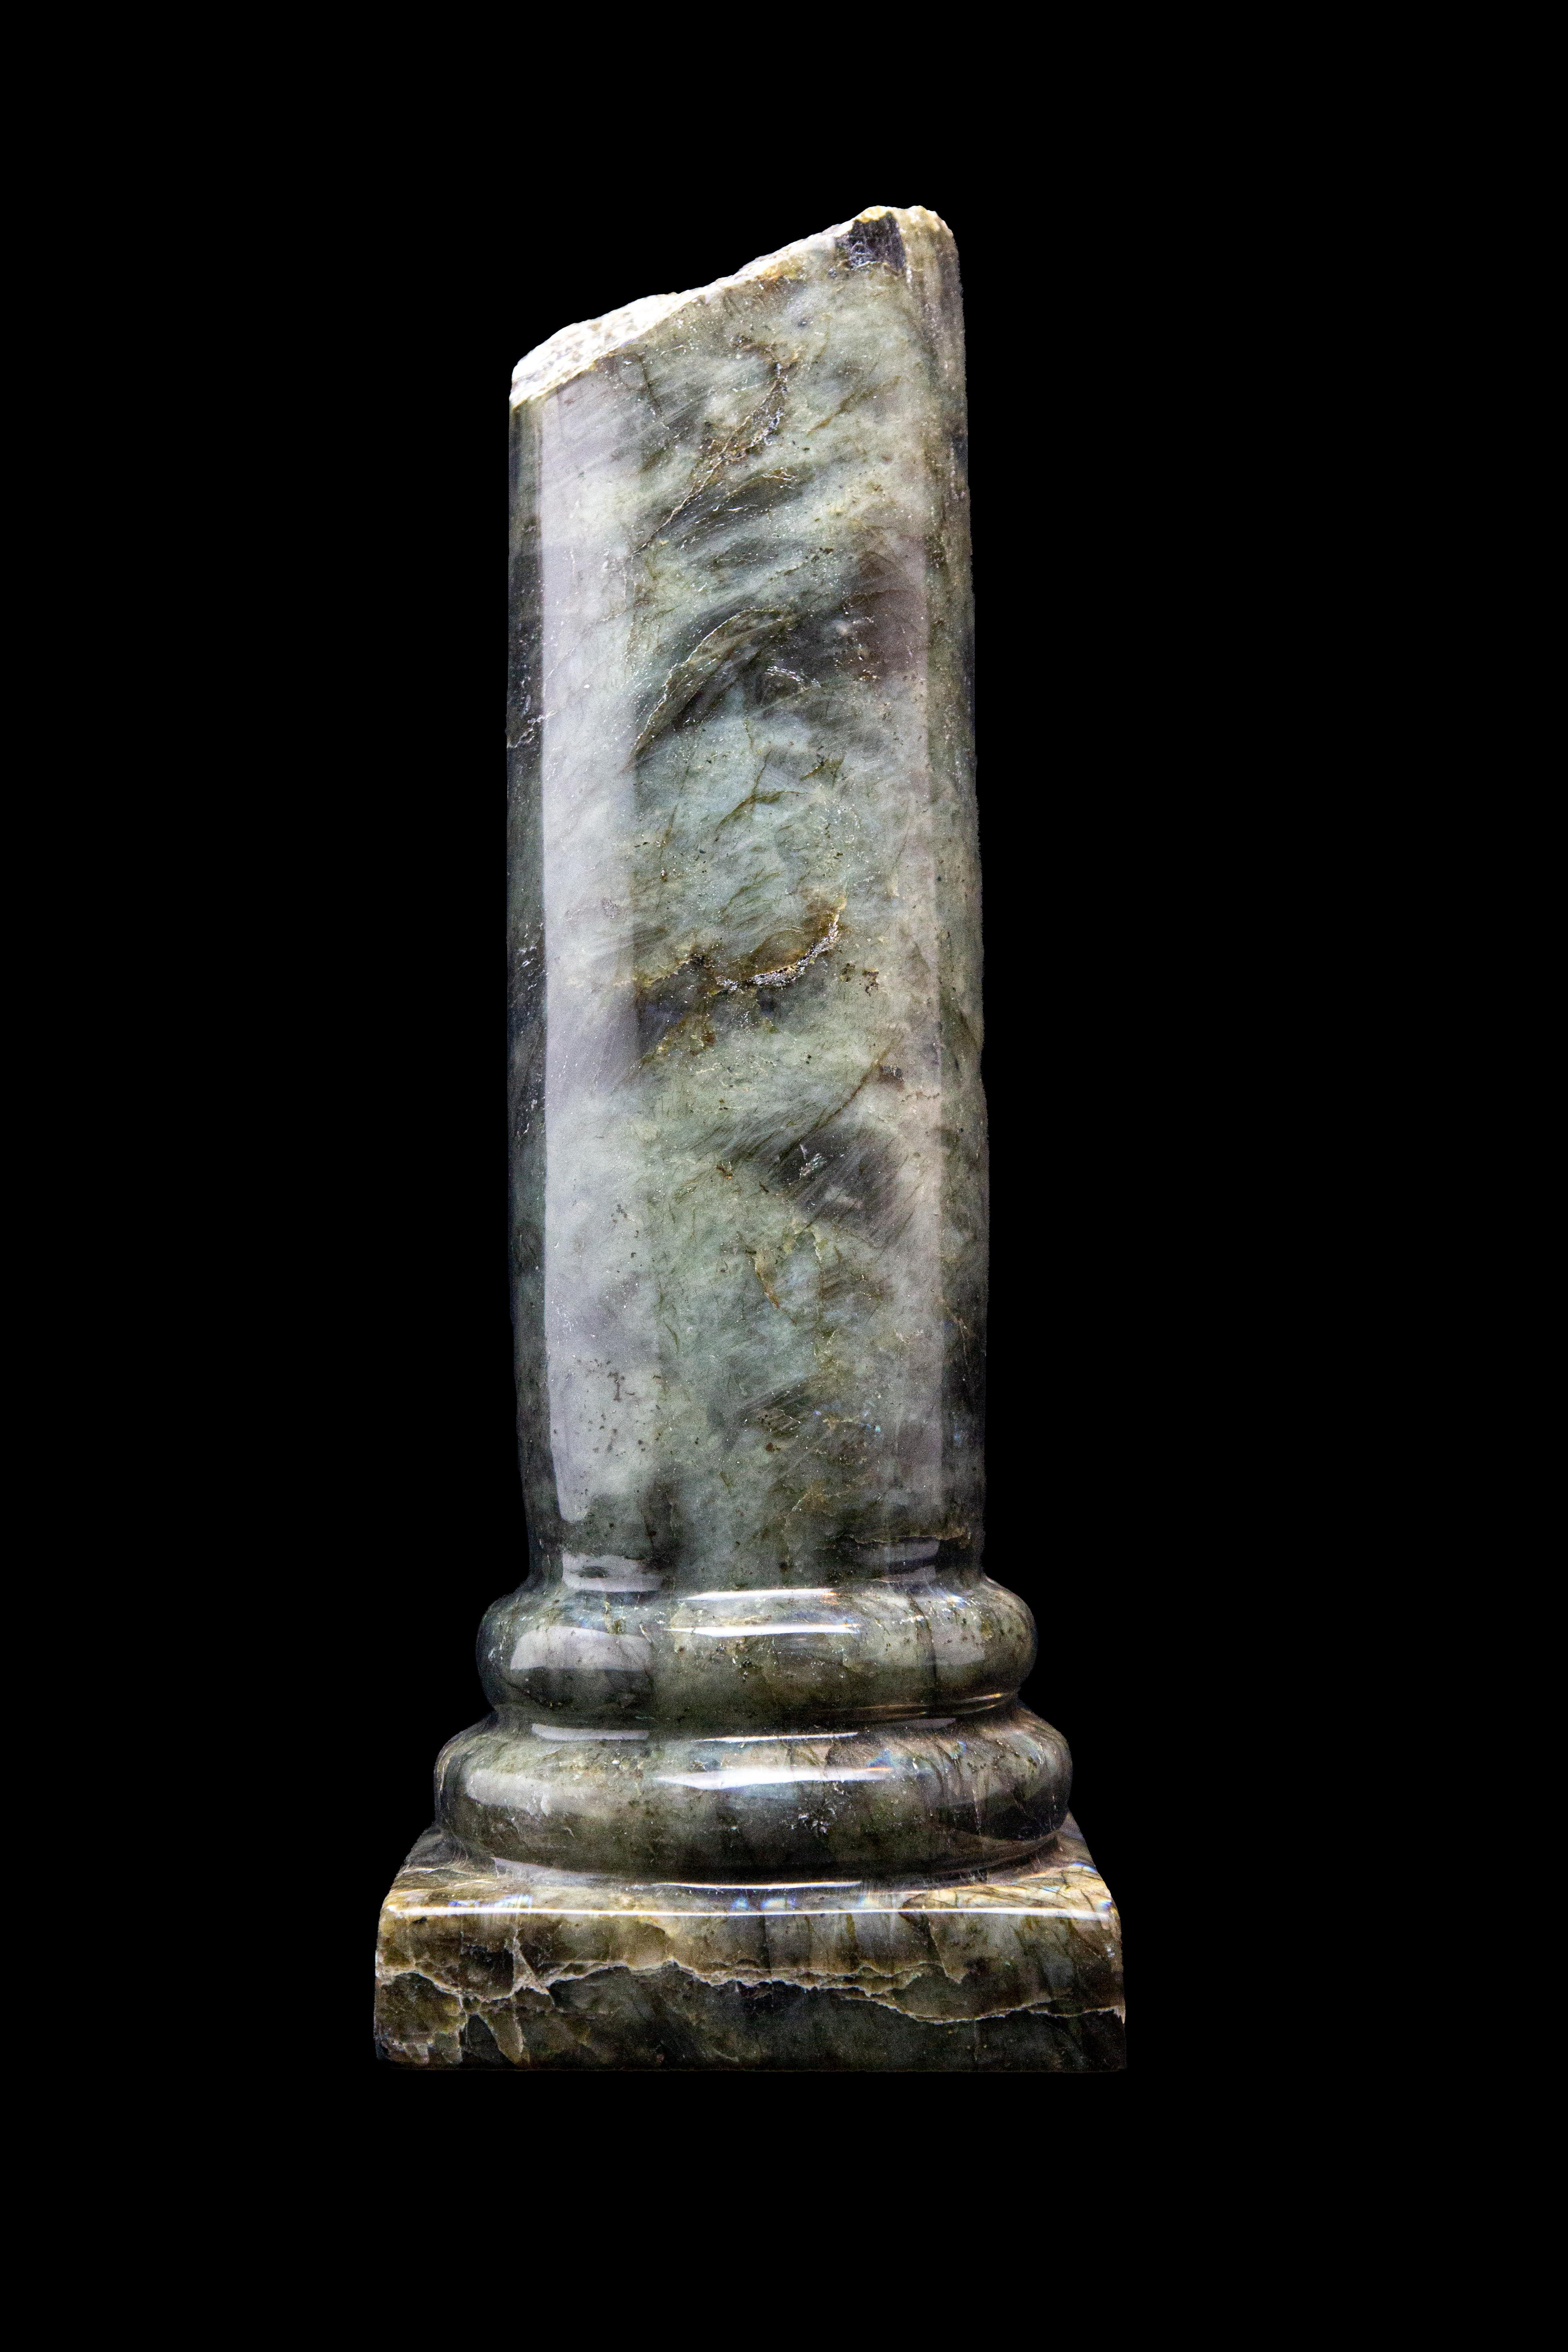 This stunning hand carved Labradorite Column is a unique and eye-catching piece that will add a touch of elegance and mystique to any space. Labradorite is a stone of transformation, protection and intuition, with a beautiful iridescent flash that